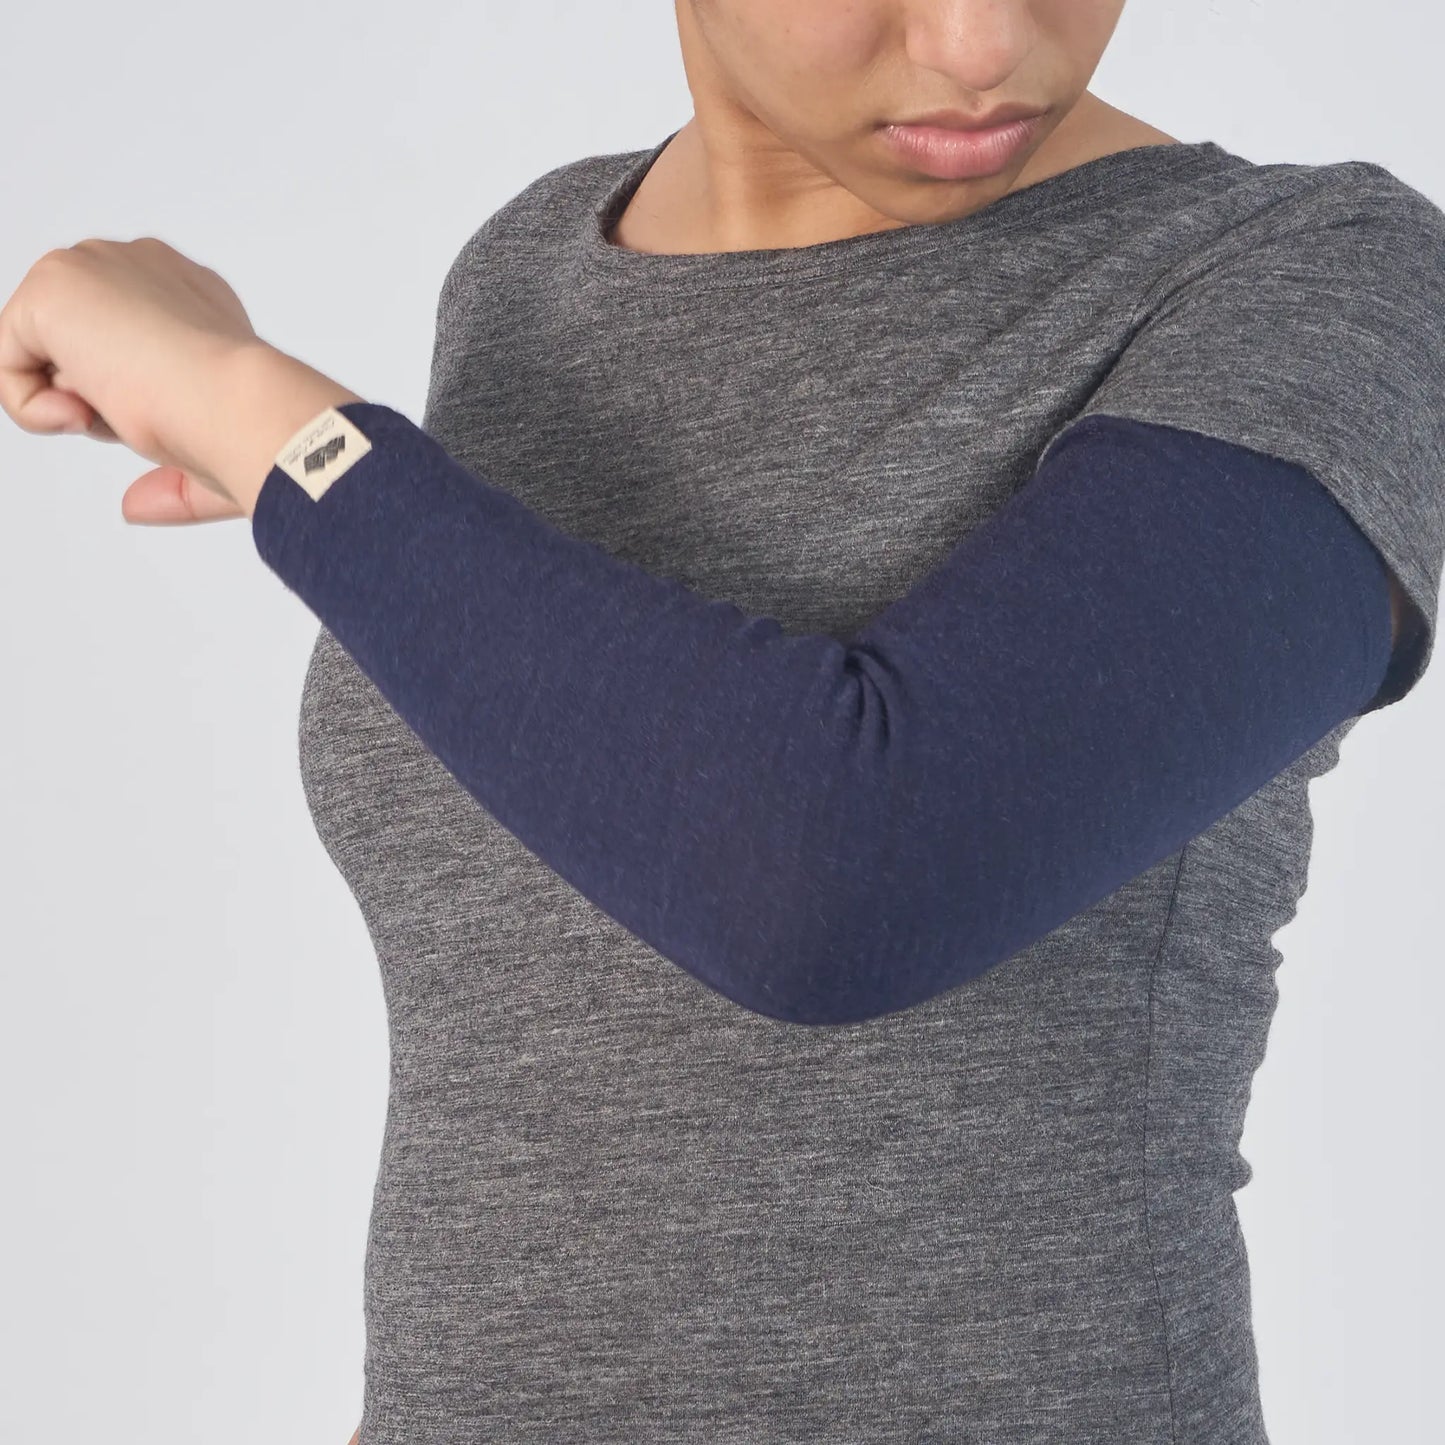 womens antiodor sleeve midweight color navy blue